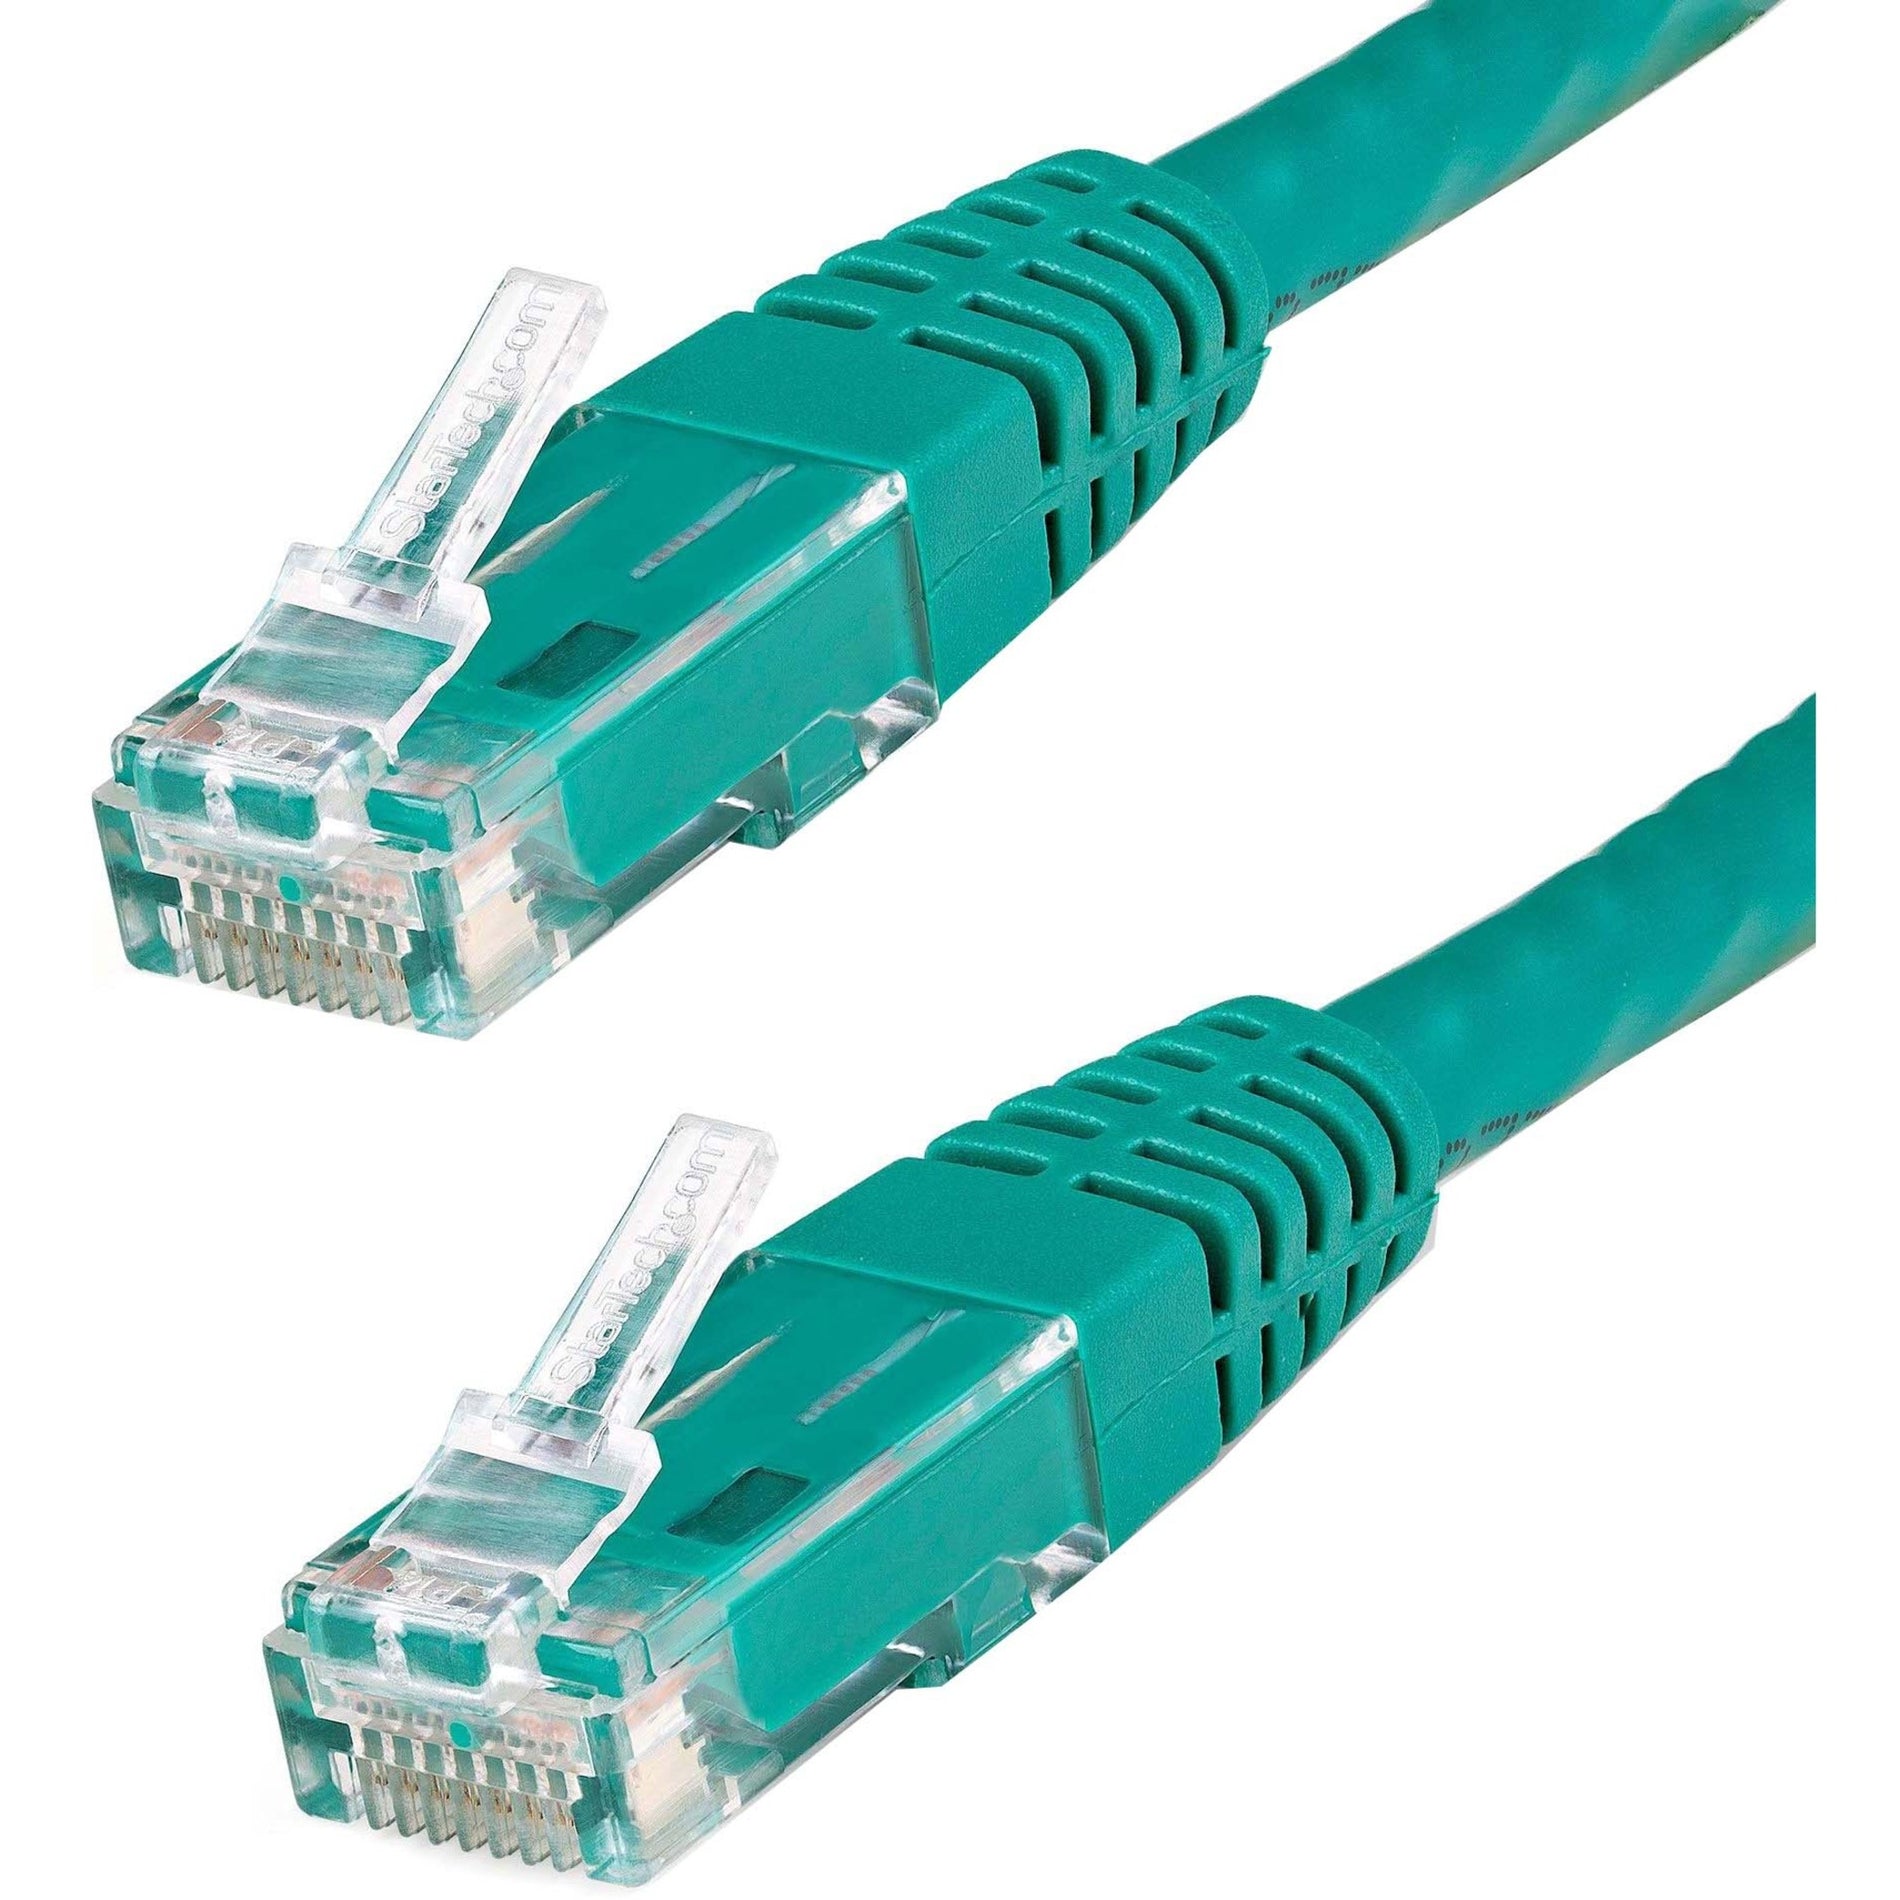 StarTech.com C6PATCH7GN 7ft Green Cat6 UTP Patch Cable ETL Verified, 10 Gbit/s Data Transfer Rate, Strain Relief